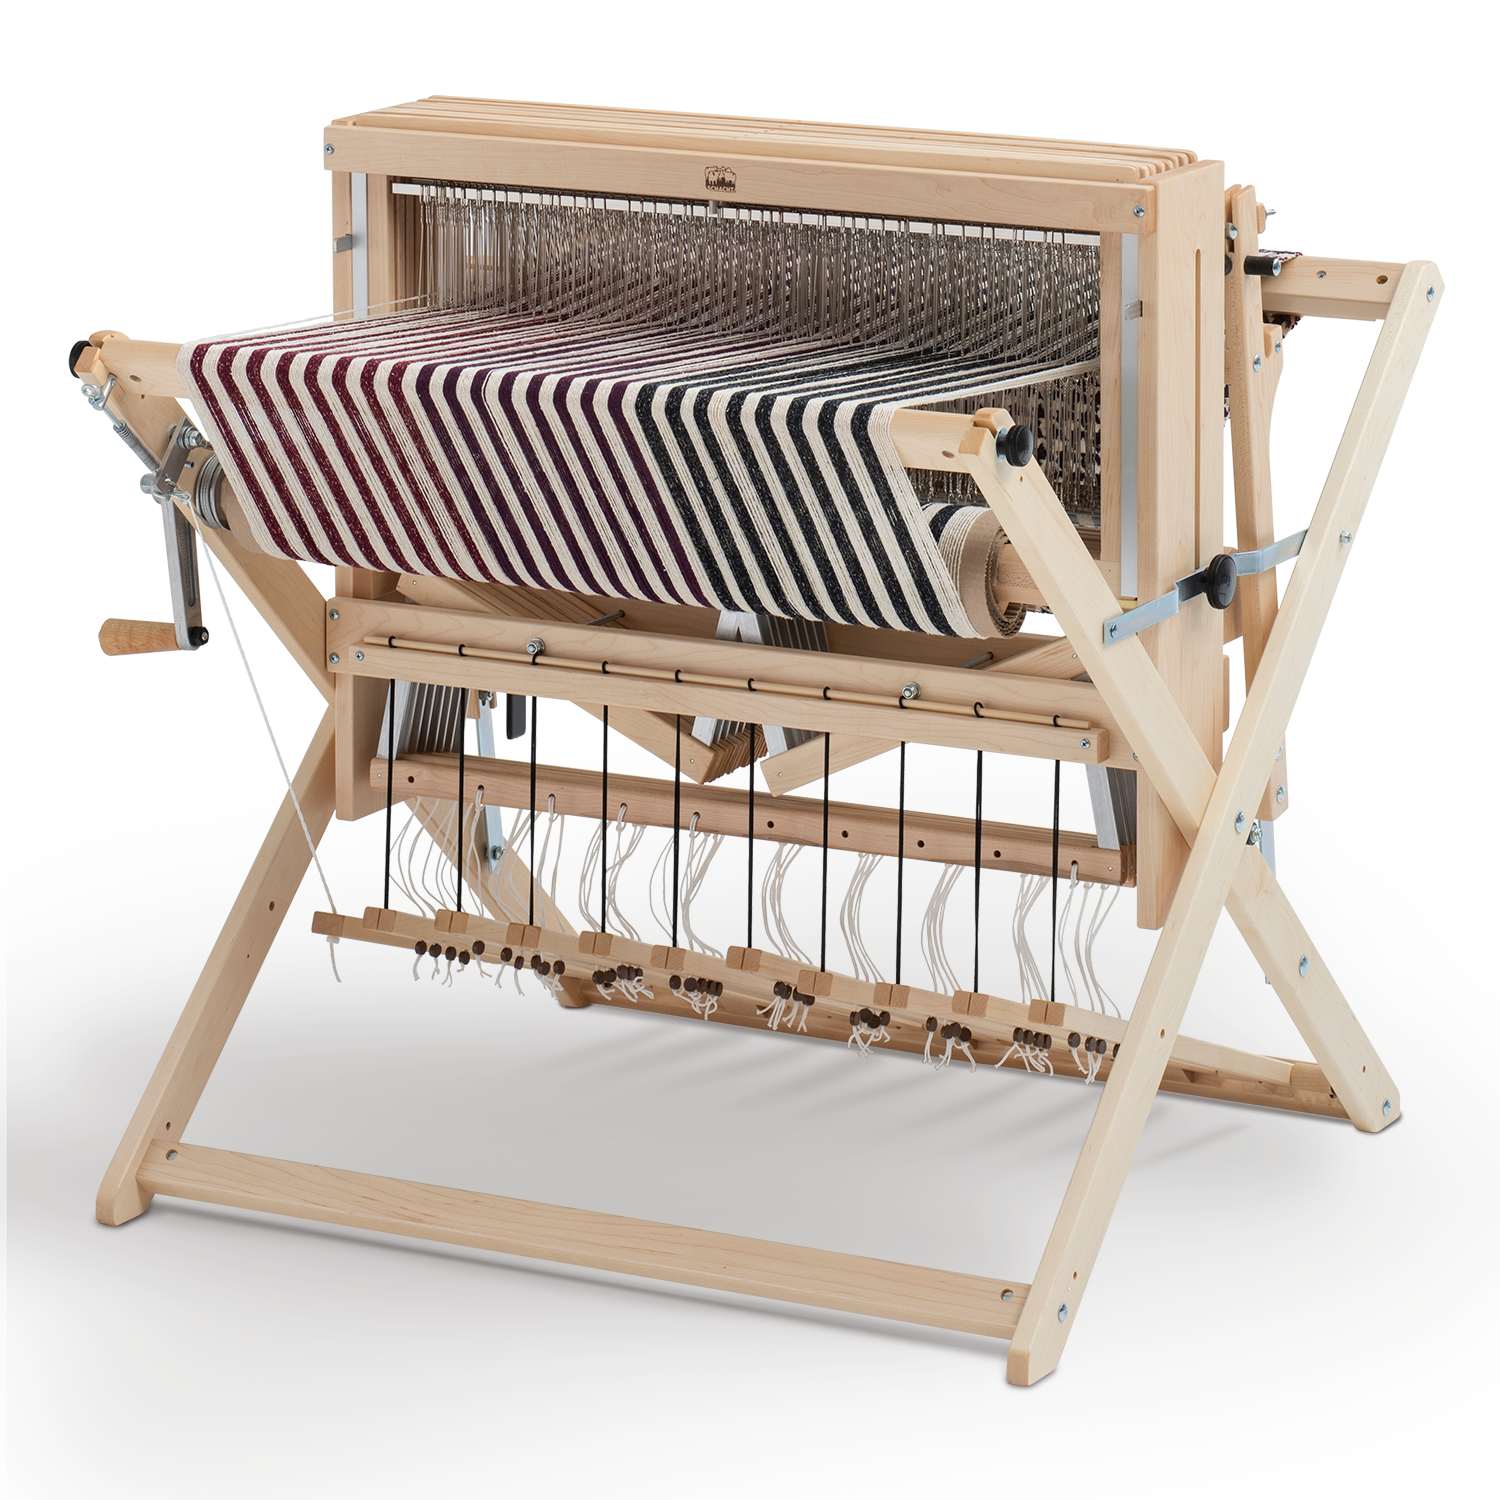 Baby Wolf Floor Loom by Schacht - GATHER Textiles Inc.